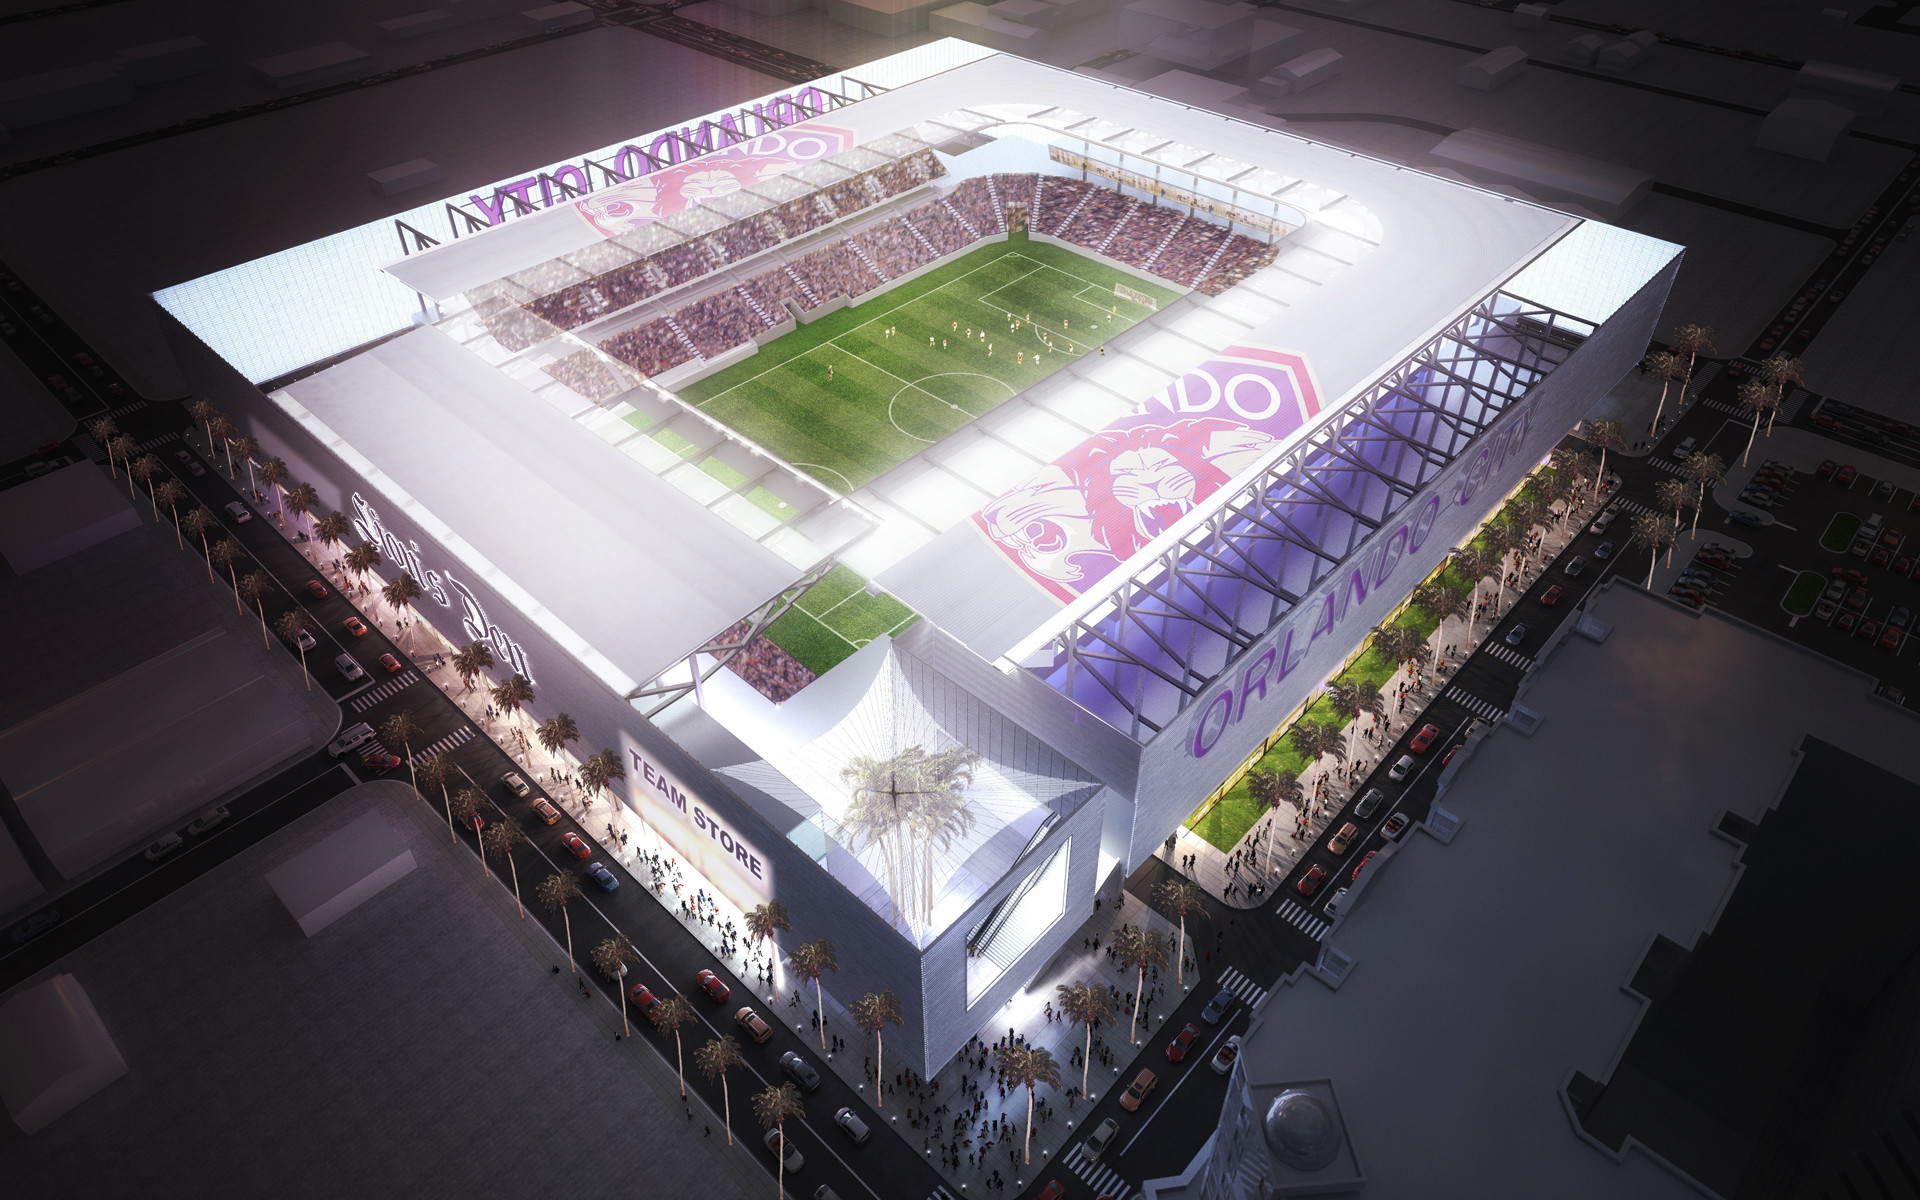 1920x1200 Rending of proposed Orlando City SC stadium released by Woods Bagot.